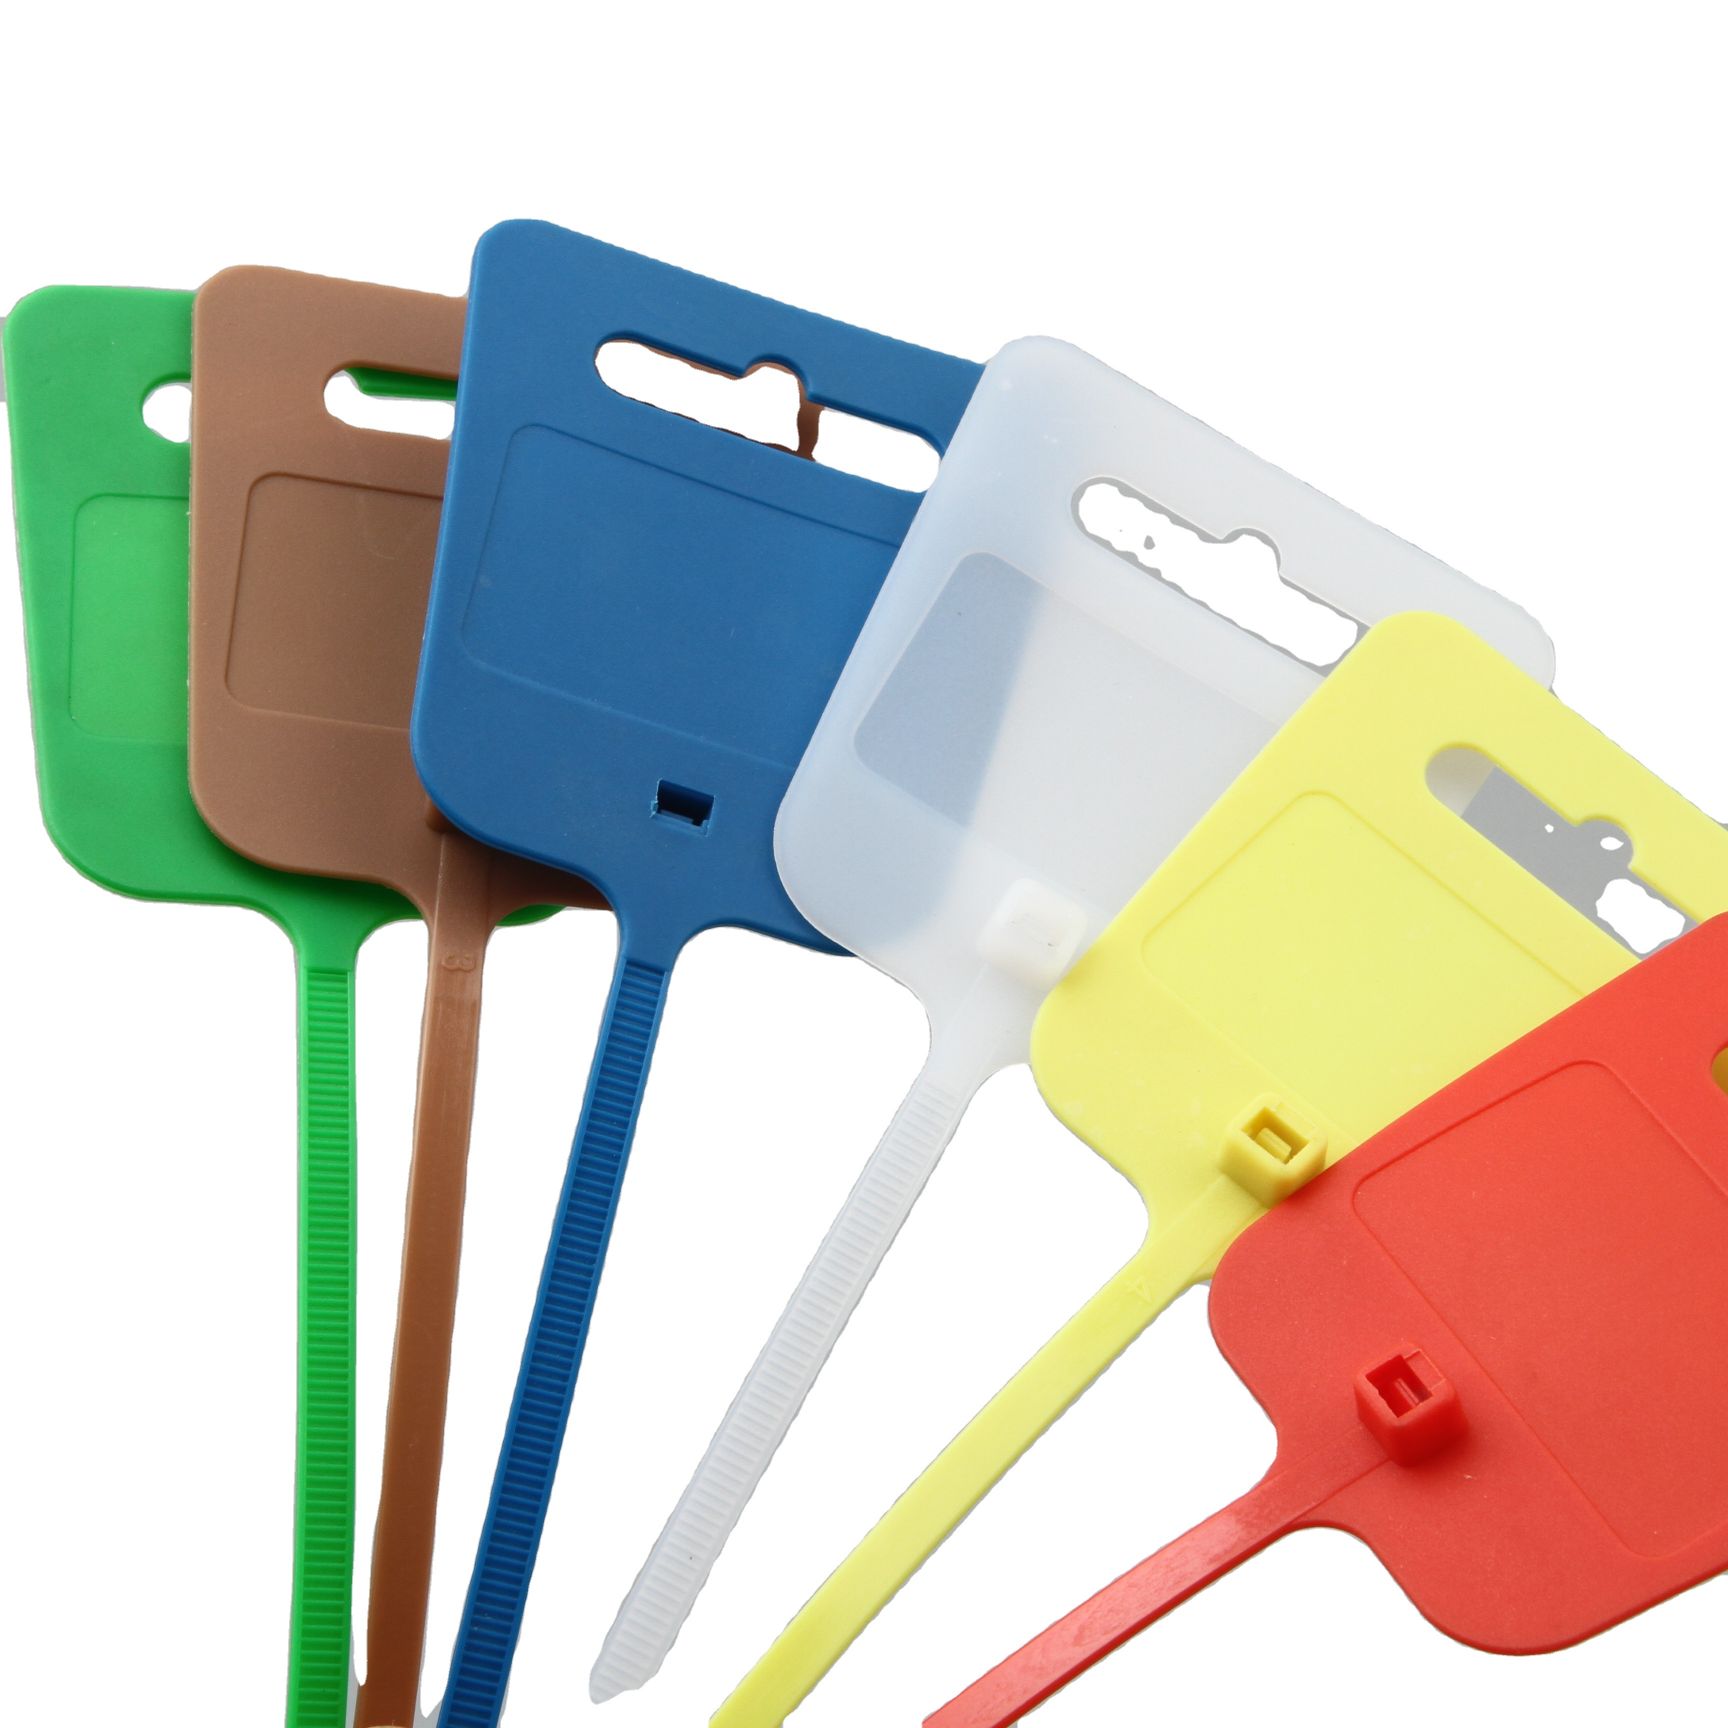 Weatherability cable ties